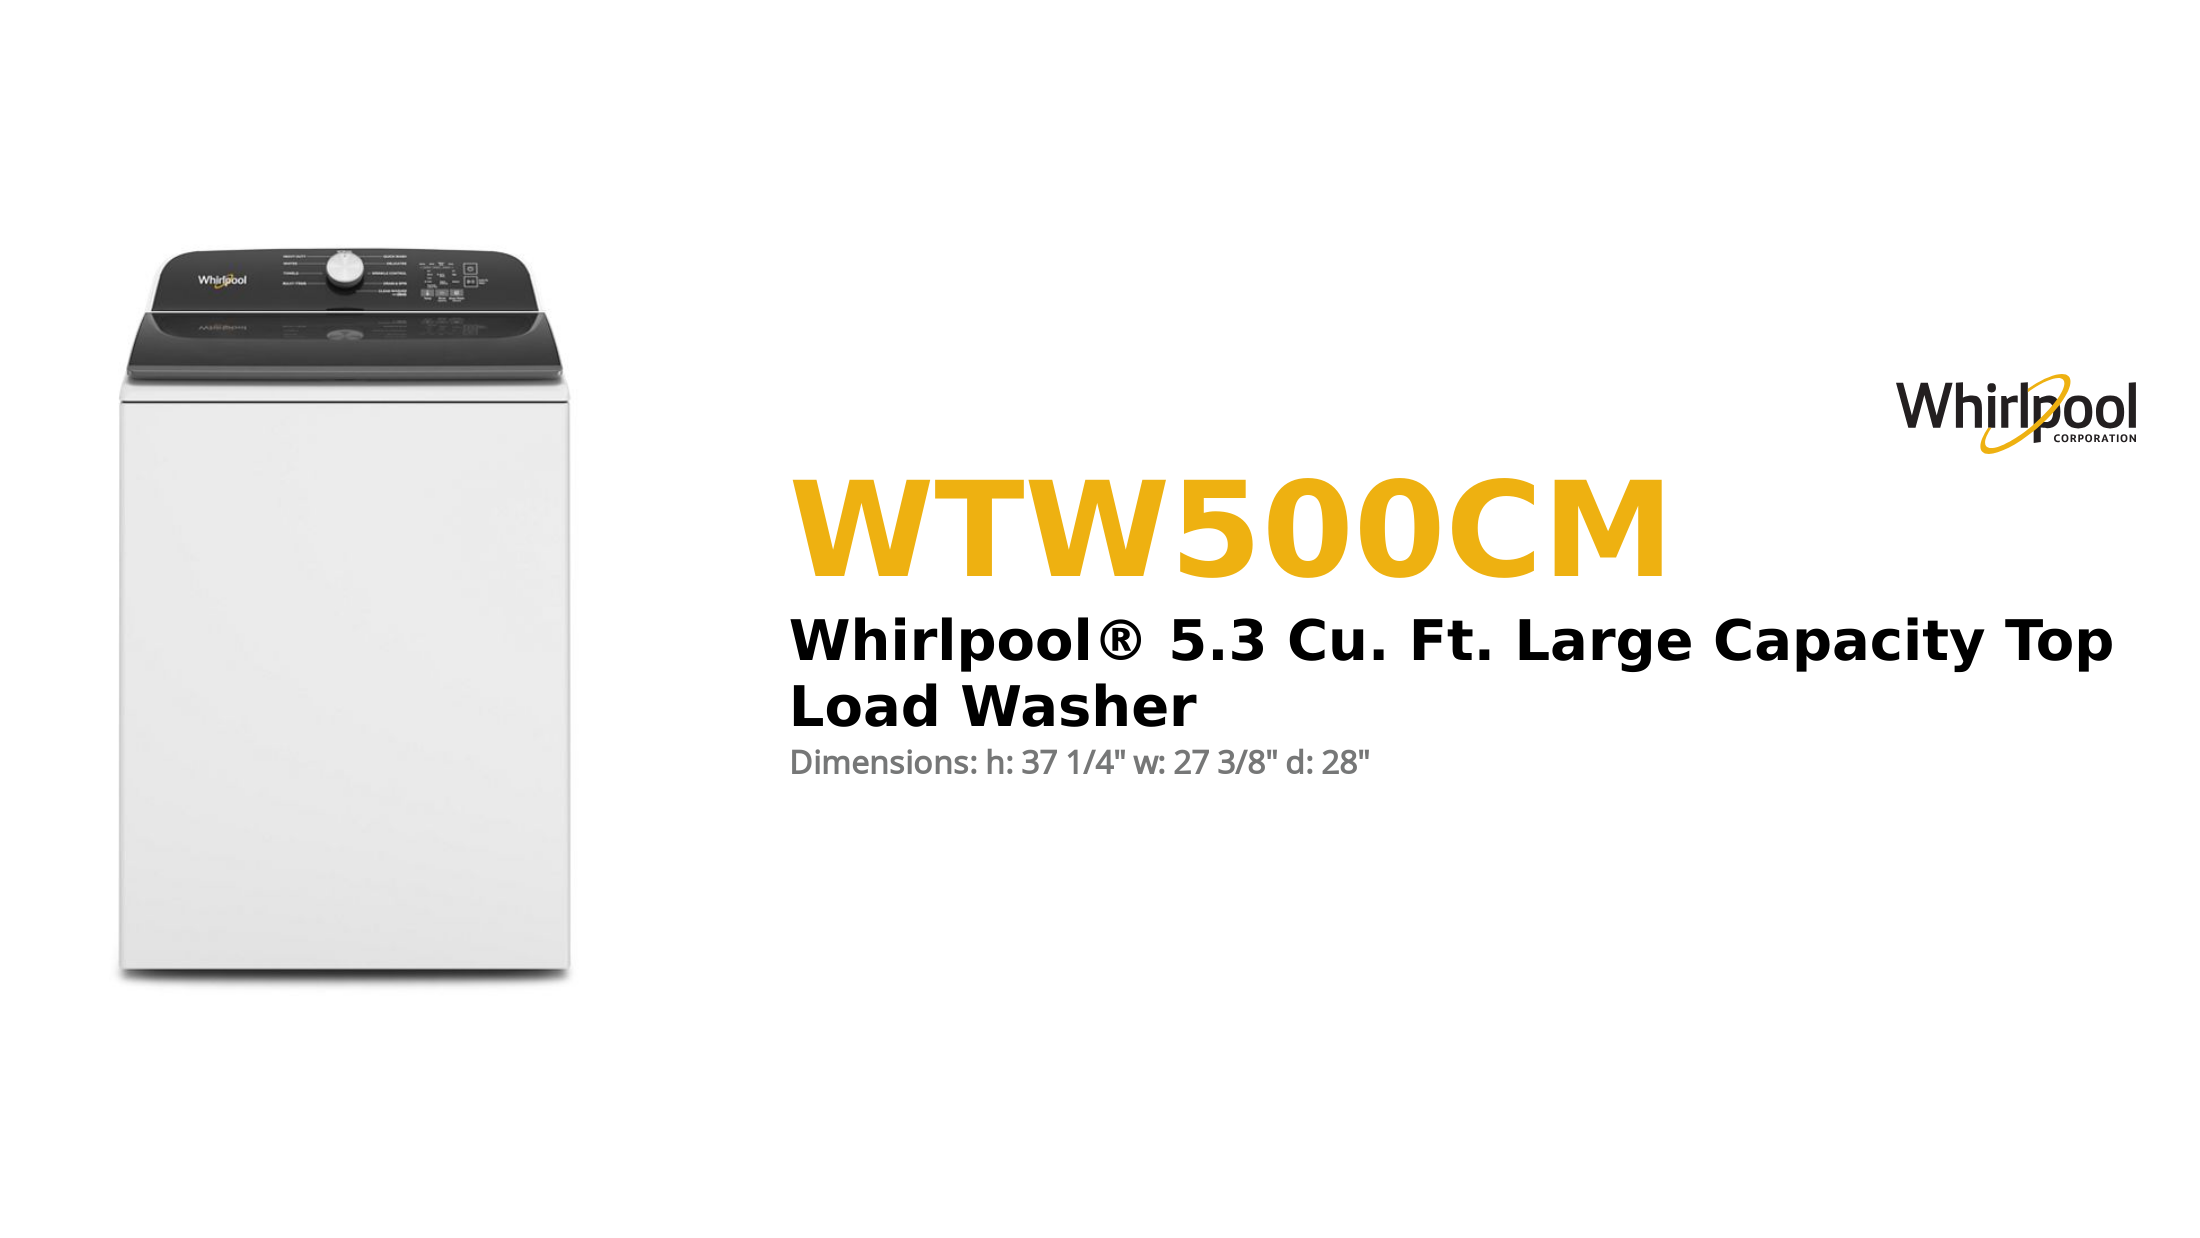 Whirlpool® 5.3 Cu. Ft. Large Capacity Top Load Washer